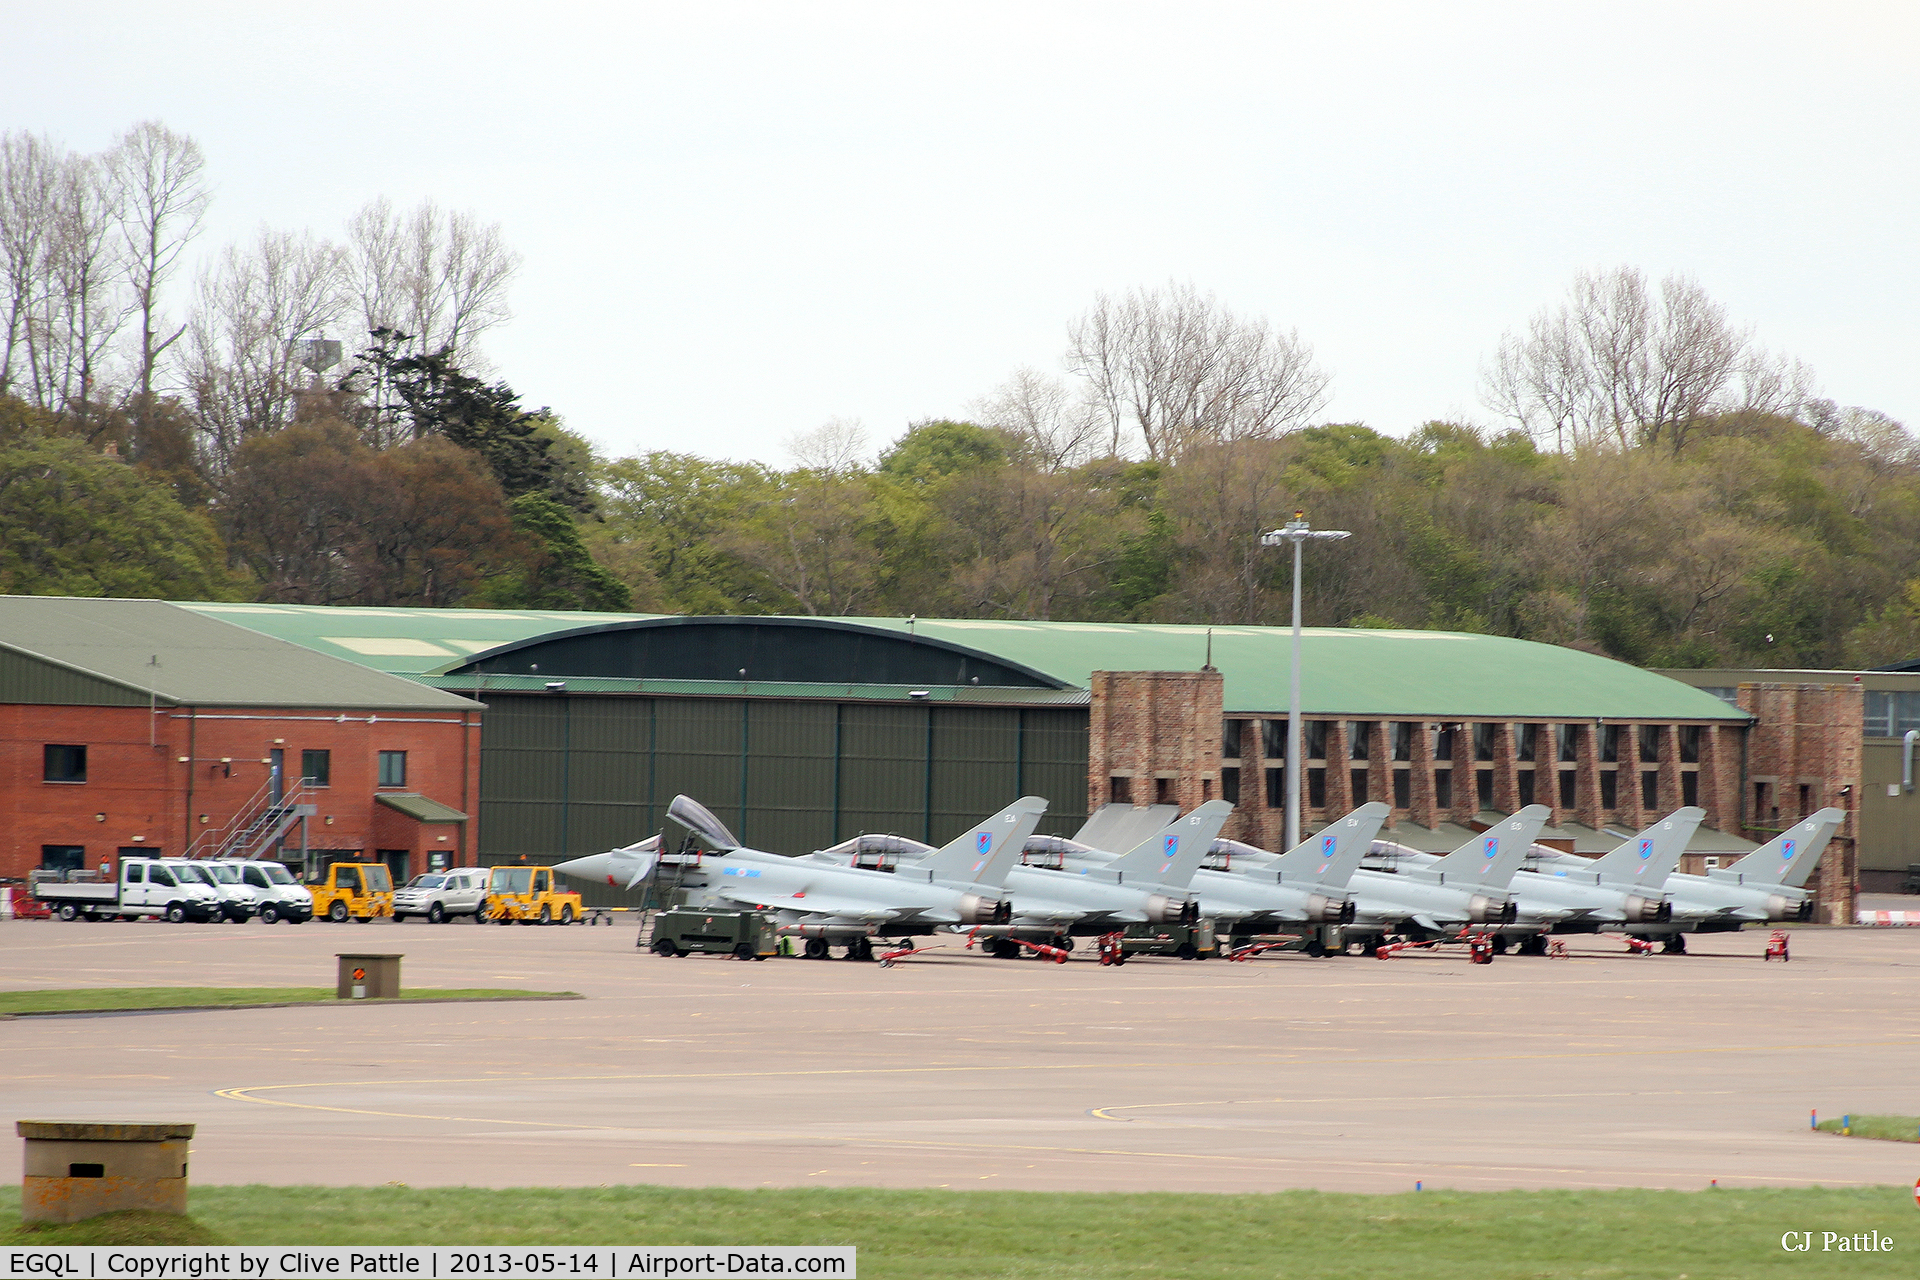 RAF Leuchars Airport, Leuchars, Scotland United Kingdom (EGQL) - A line-up of some of the resident Typhoons of 6 Sqn on the apron at RAF Leuchars. They are, from L-R FGR.4's ZK302/coded EA, ZK318/ET, ZK320/EV, ZK314/EO, ZK324/EI and T.3 ZK381/EX. The Sqn has now moved north to RAF Lossiemouth EGQS.